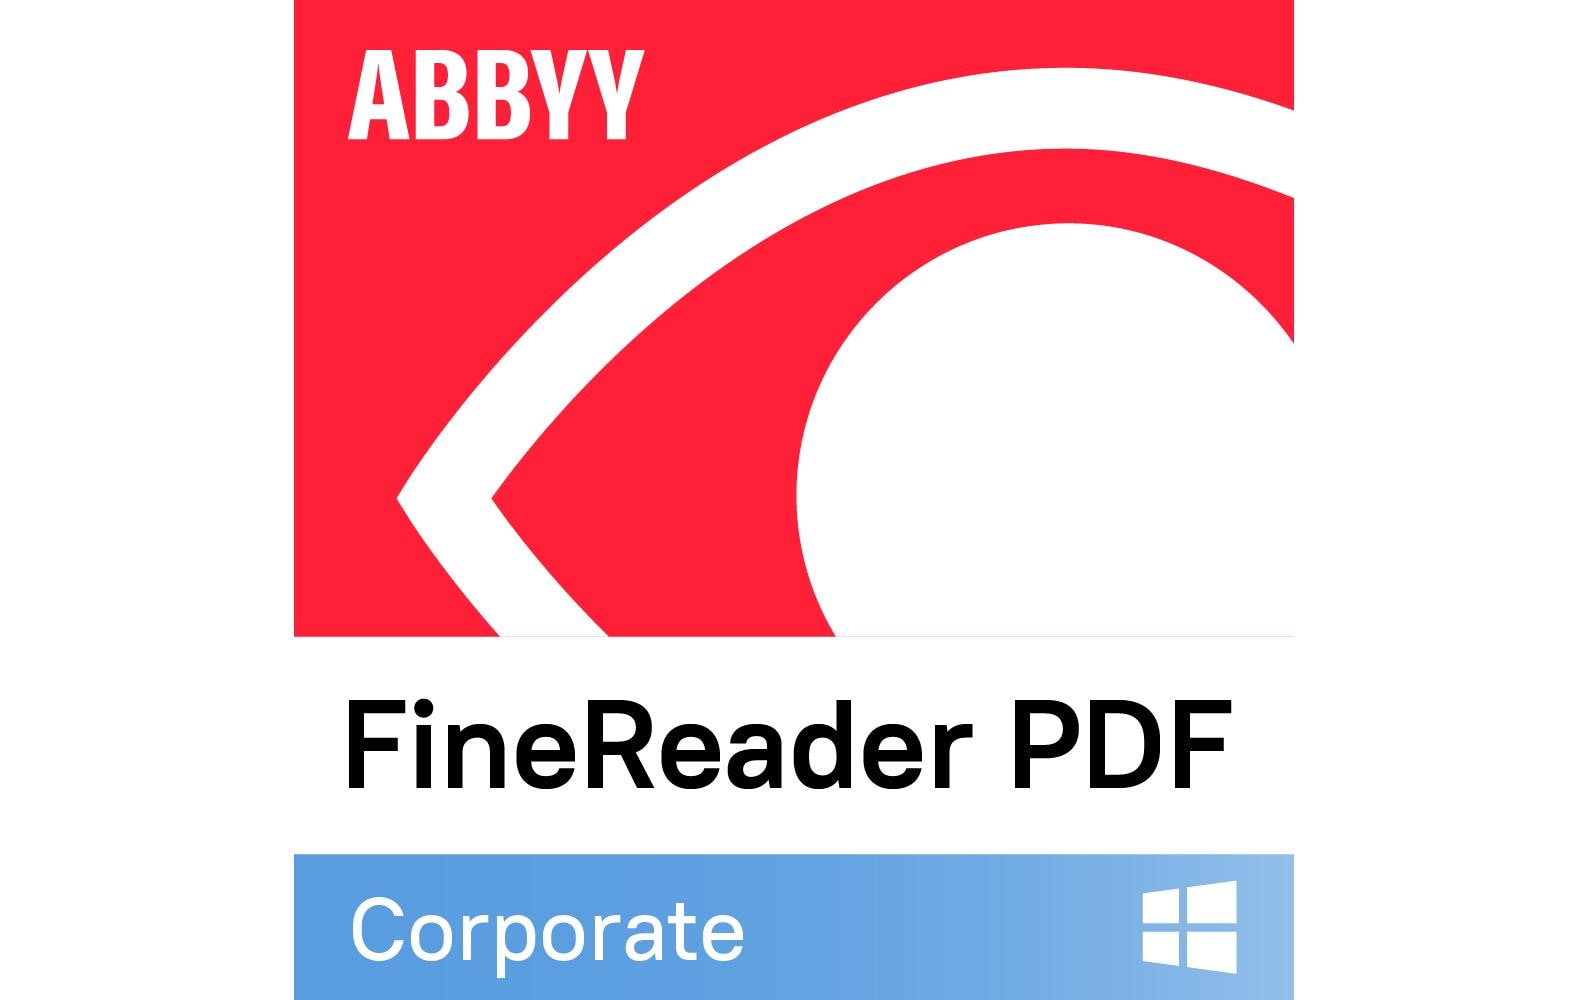 ABBYY FineReader PDF Corporate Subscr., per Seat, 26-50 User, 3yr